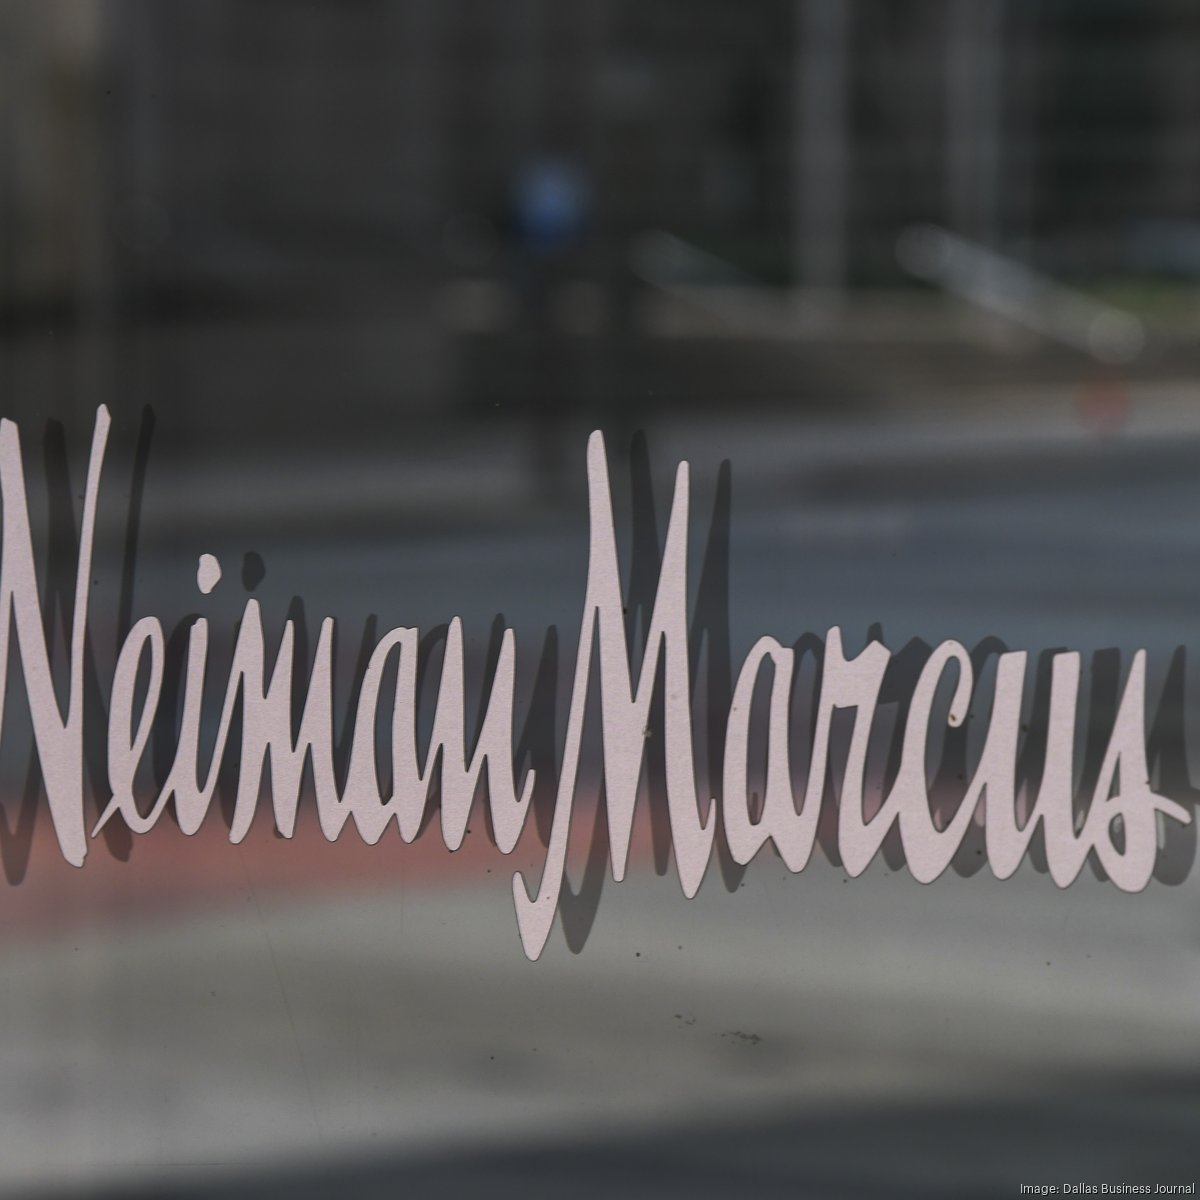 Is Neiman Marcus back on the market after 18 years of private